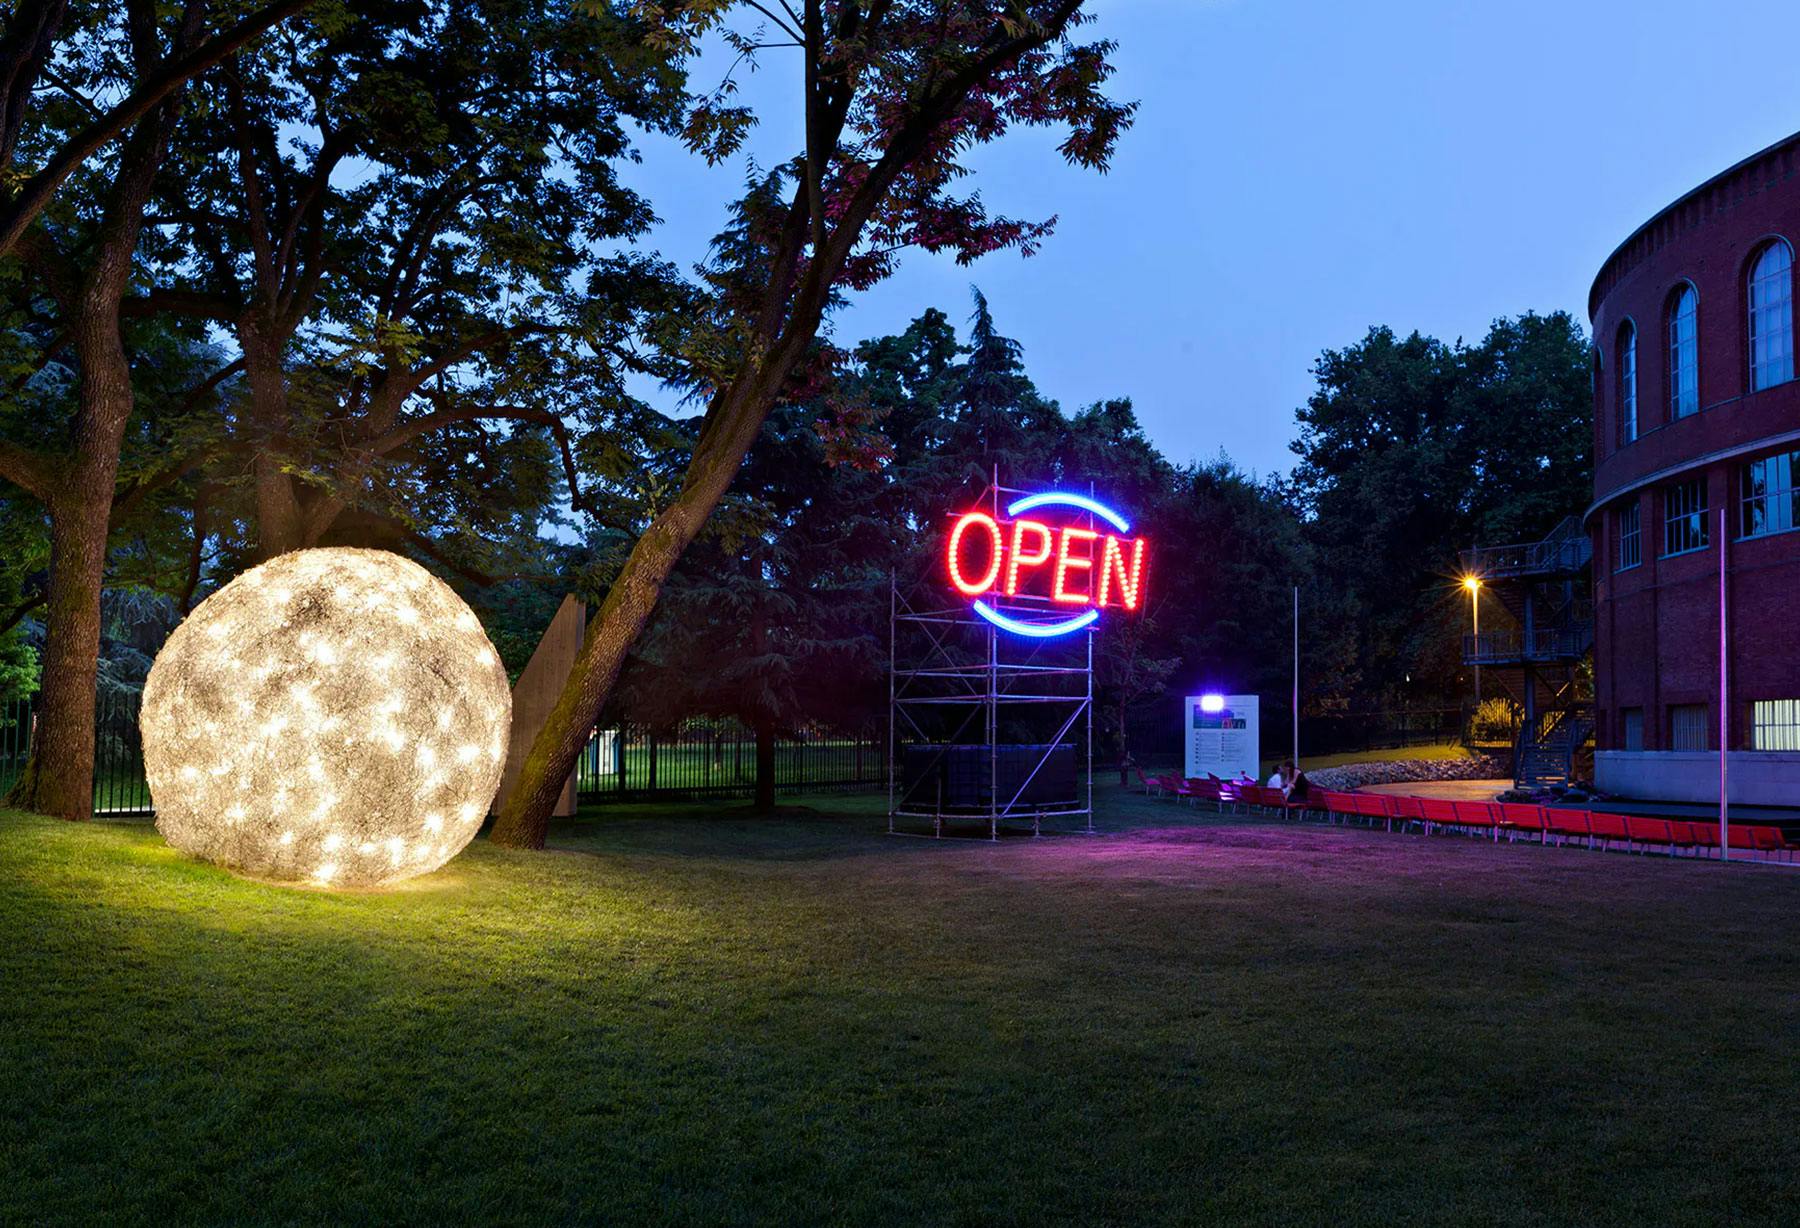 <p>In the gardens of the Triennale is installed a permanent version of “Fil de Fer” with a diameter of 3 meters manufactured with almost 22.000 meters of aluminum wire with a total weight of 350 kg. It is lit up by 400 bulbs (nowadays LED ones) creating the visual and emotional impact of a fallen cosmos.</p>
